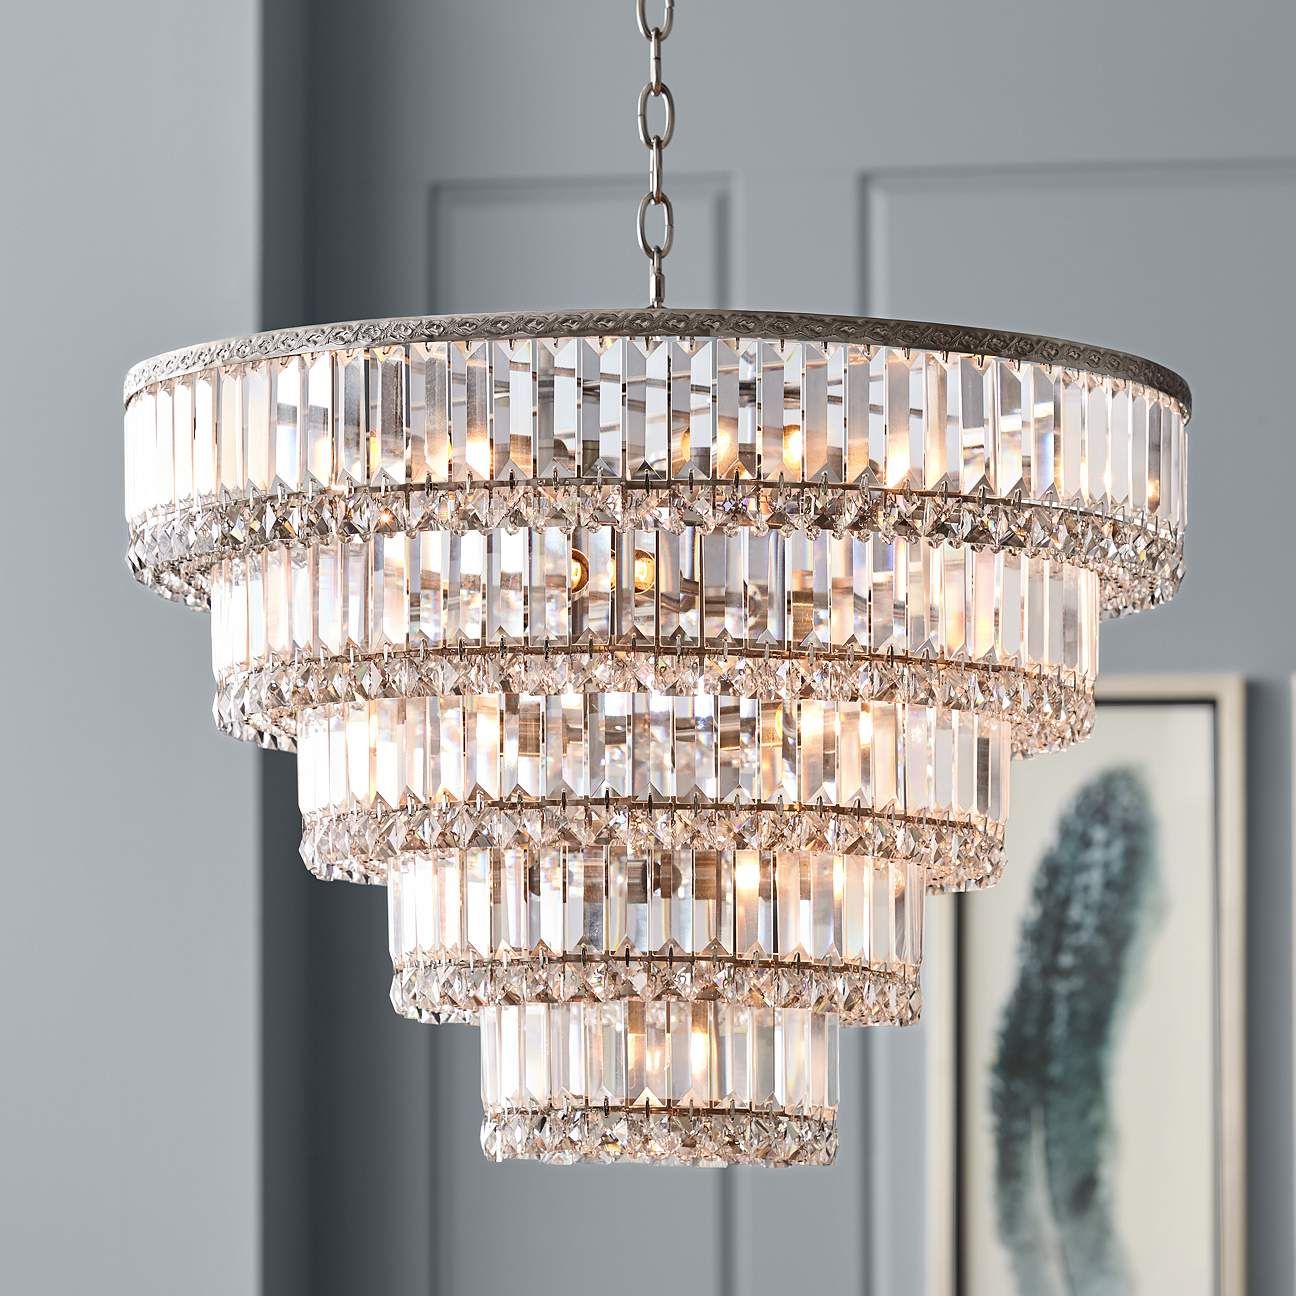 Magnificence 24 1/2"W Satin Nickel and Crystal LED 15-Light Chandelier | Lamps Plus